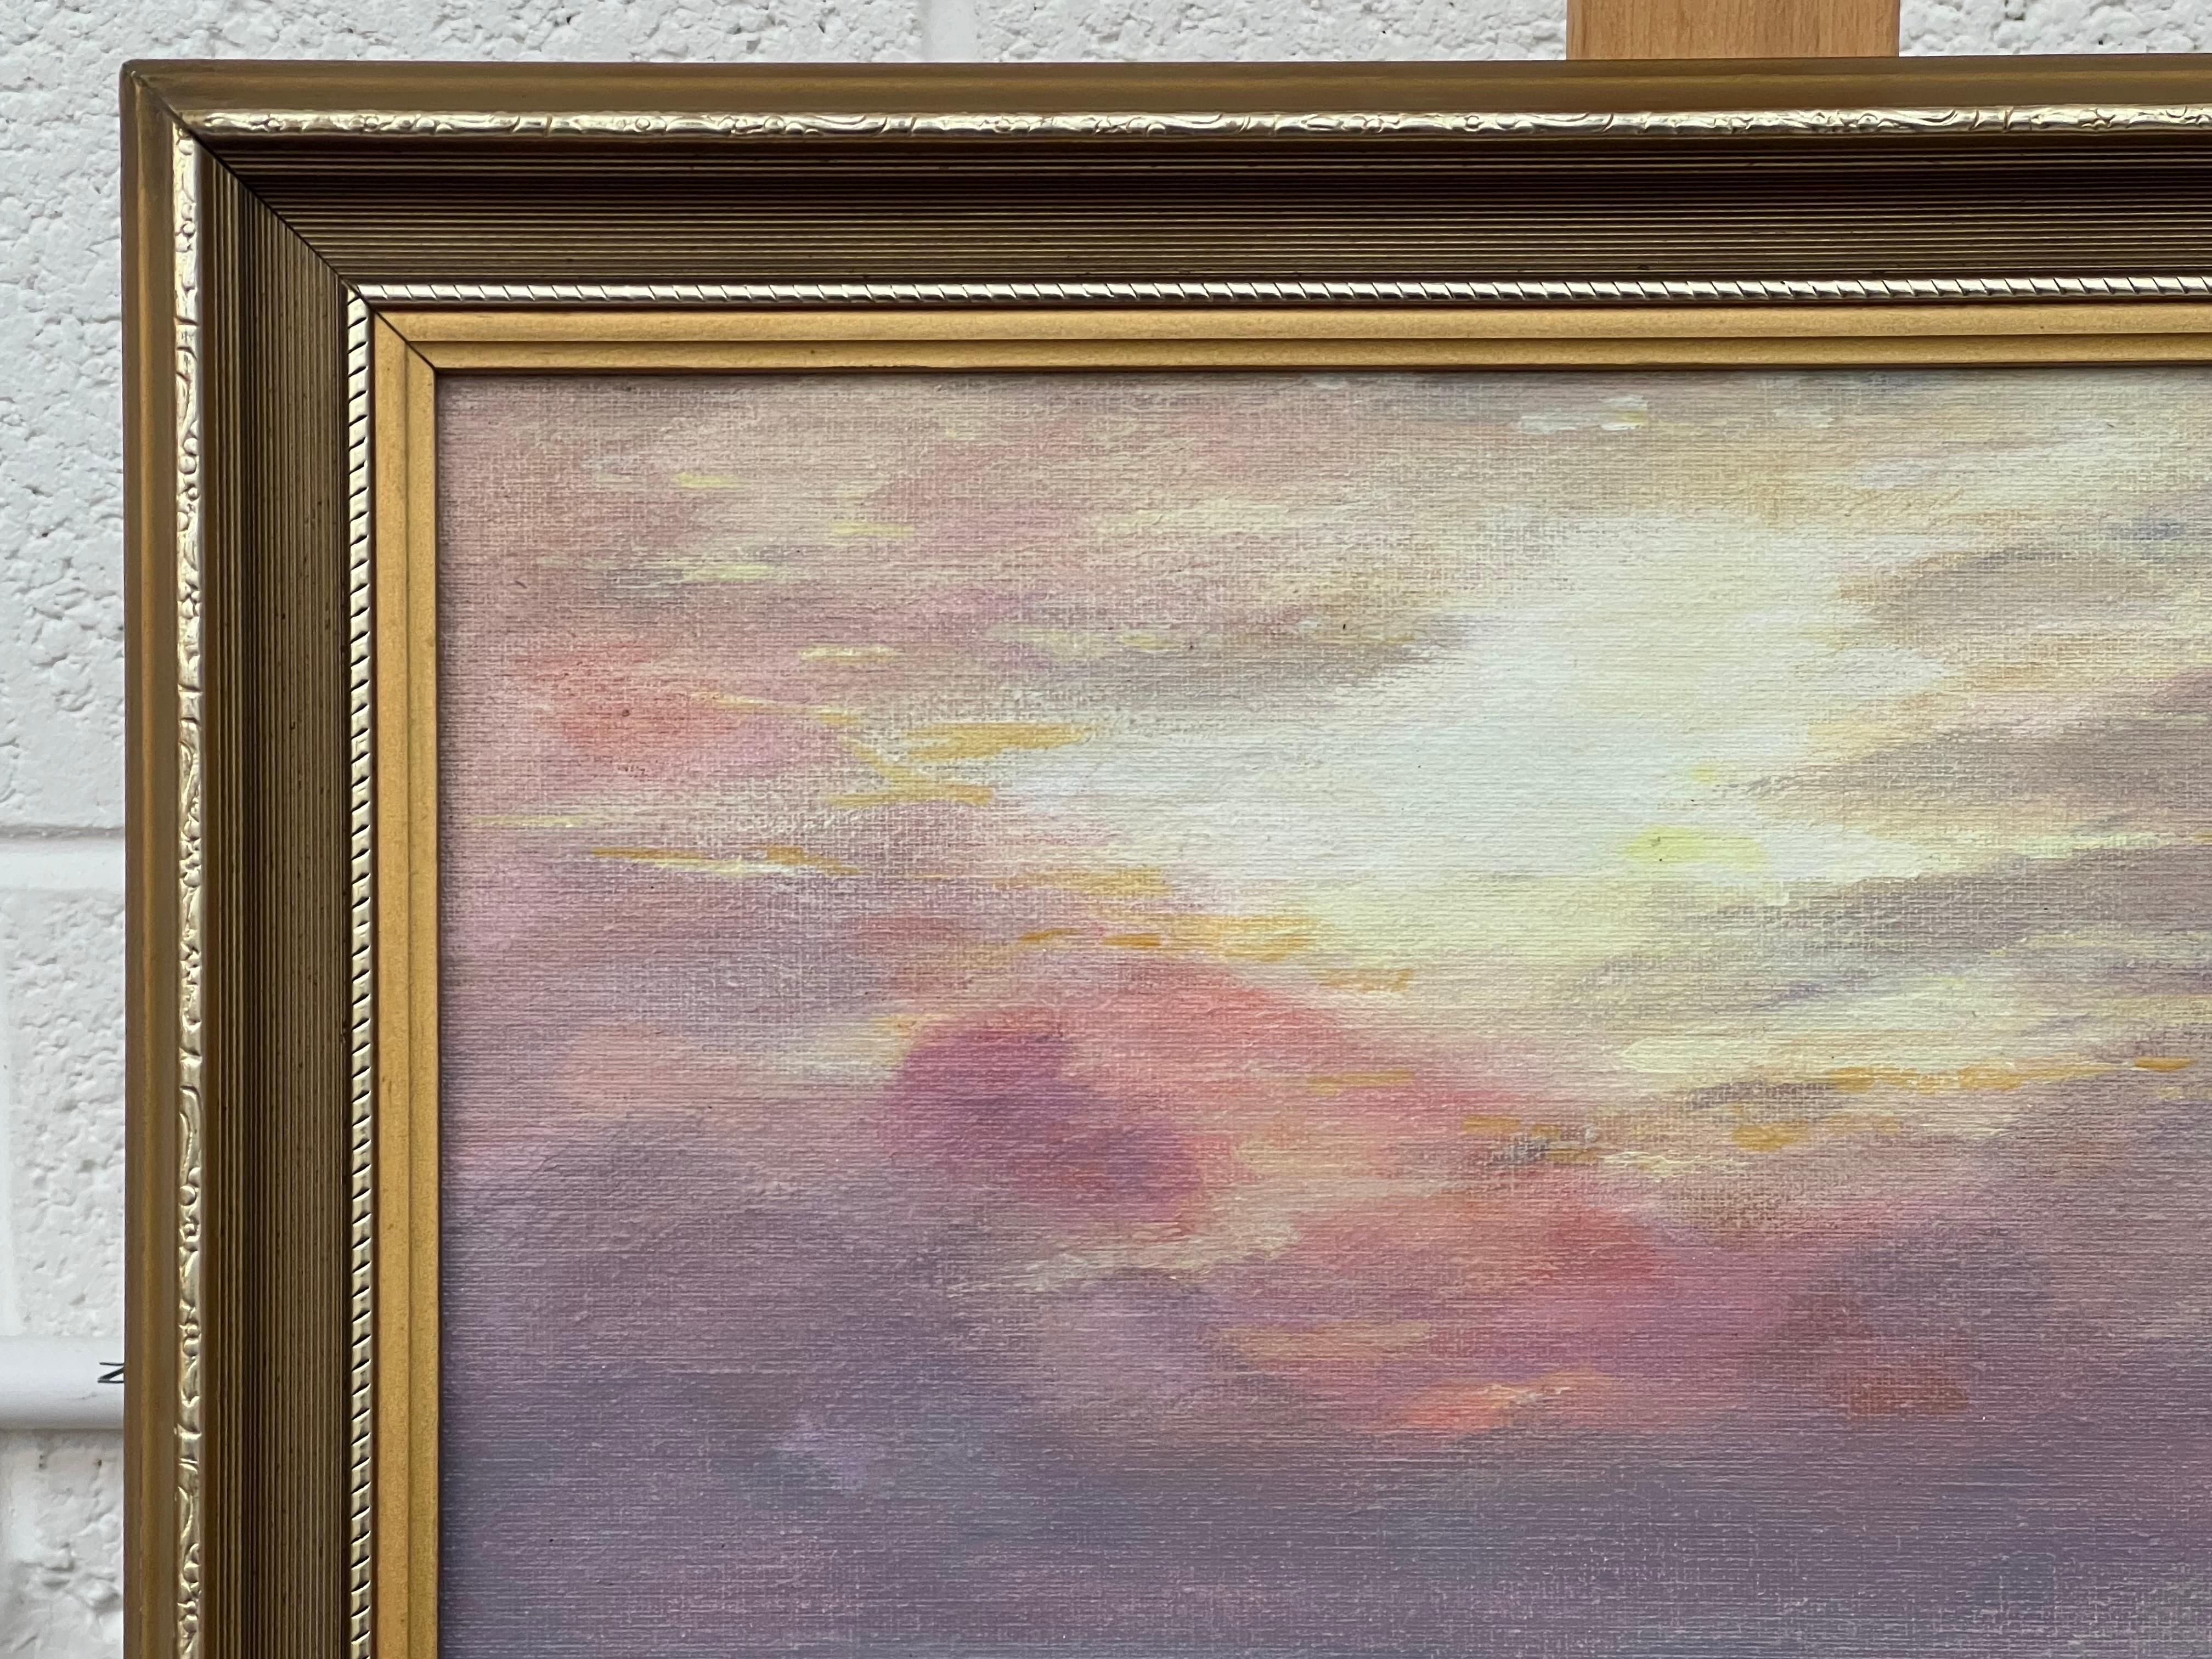 Dawn Seascape Painting with Pink Sky and Waves by 20th Century British Artist For Sale 3